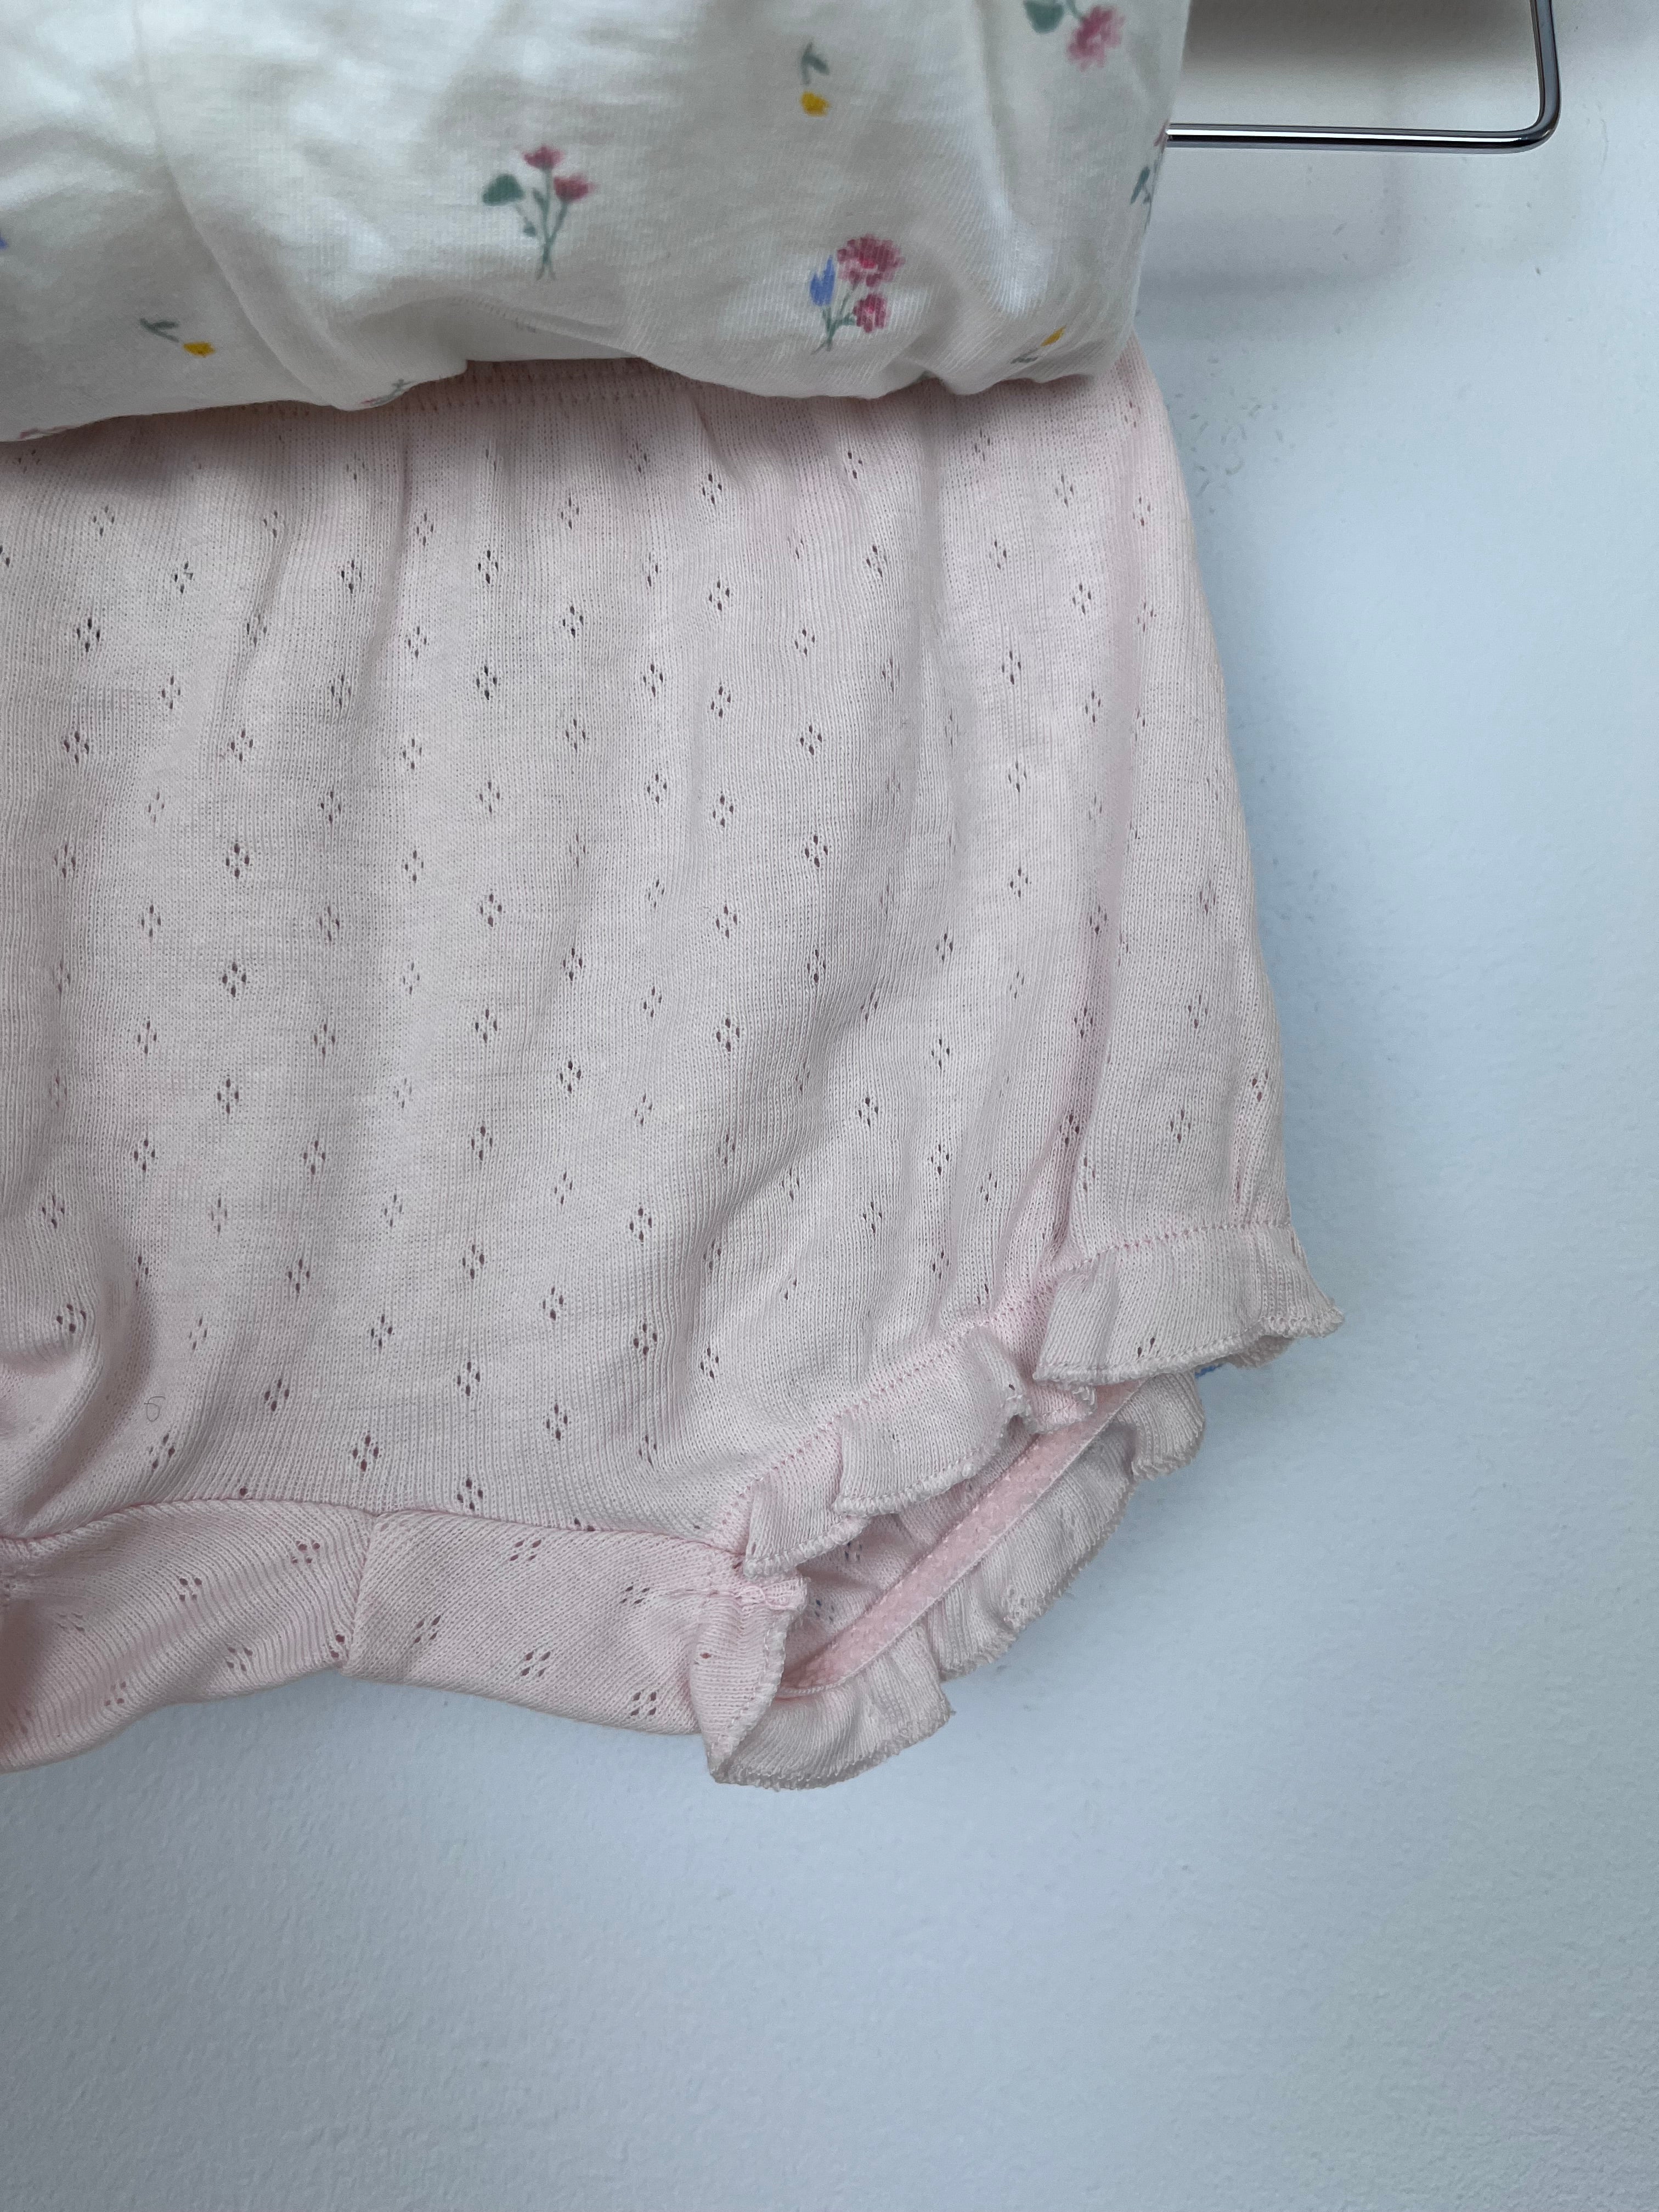 H&M 2-4 Months-Shorts-Second Snuggle Preloved